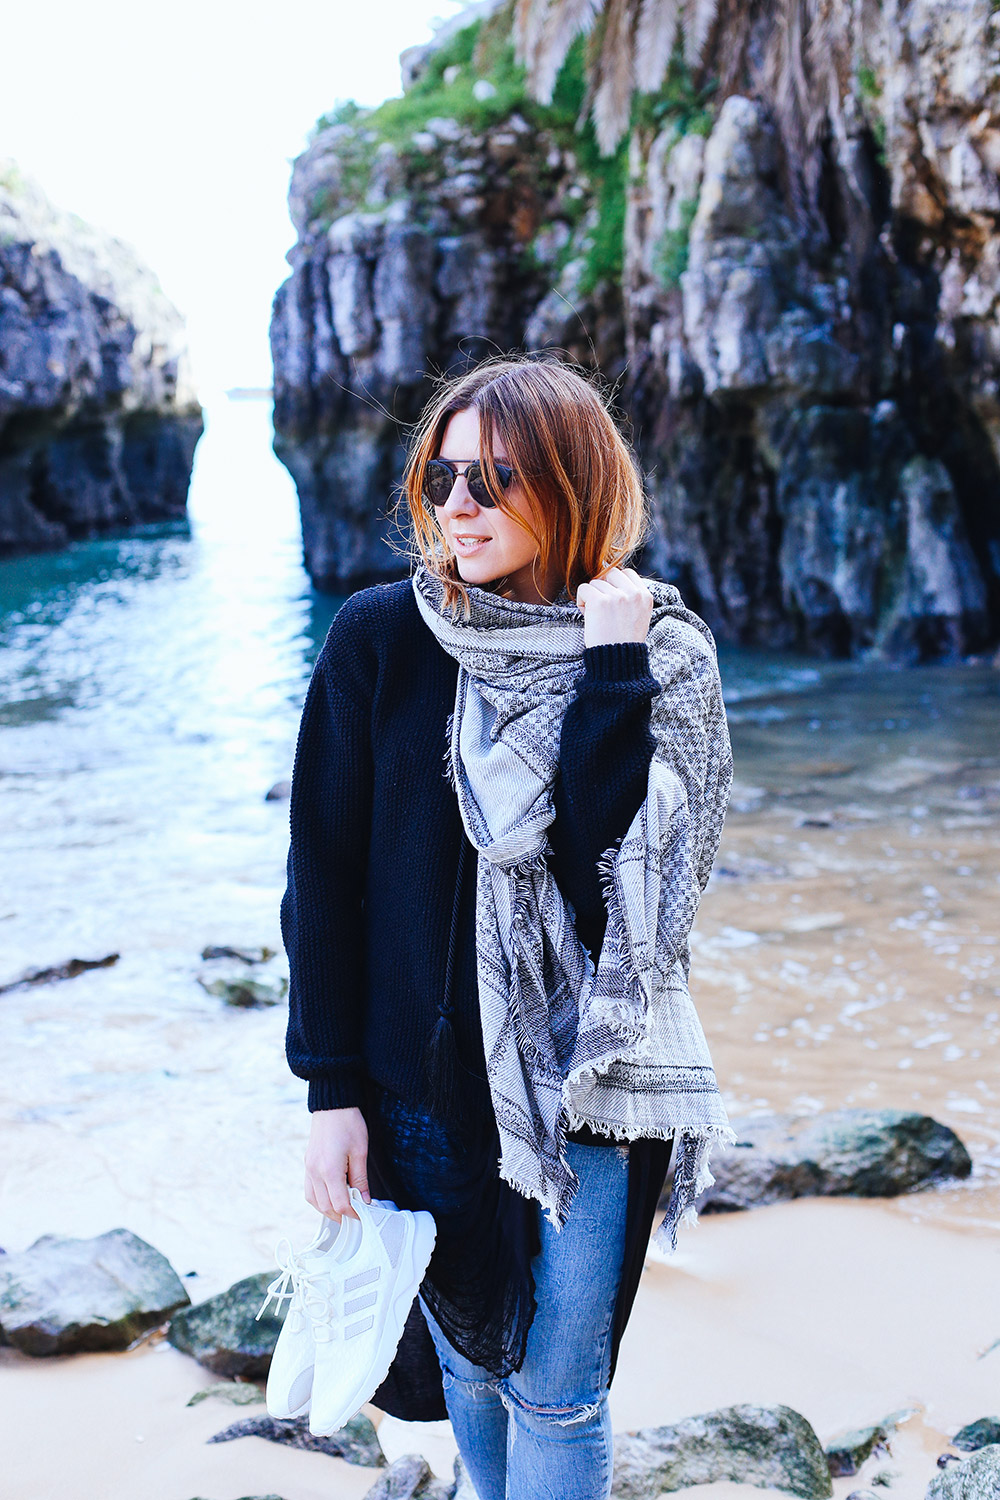 Ripped Jeans Outfit, Longshirt Free People, schwarzer Zara Pullover, Layering, Cascais, Lissabon, Küste, Streetstyle, Fashion Blogger, whoismocca.com